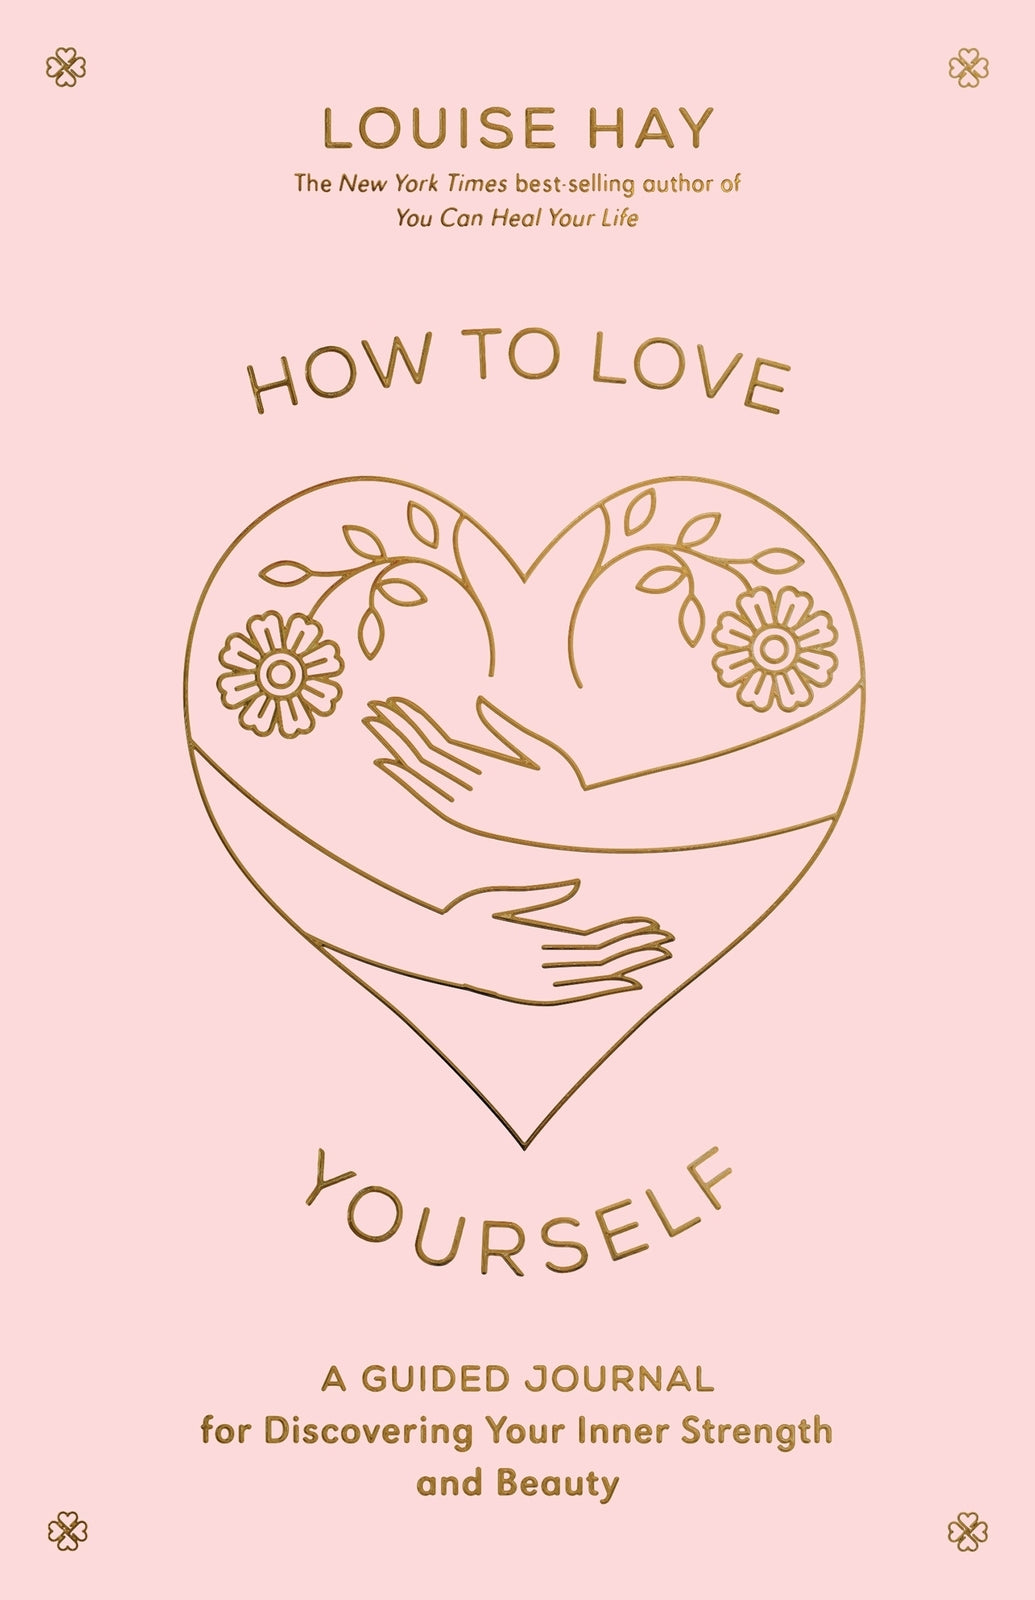 How to Love Yourself: A Guided Journal | Louise Hay